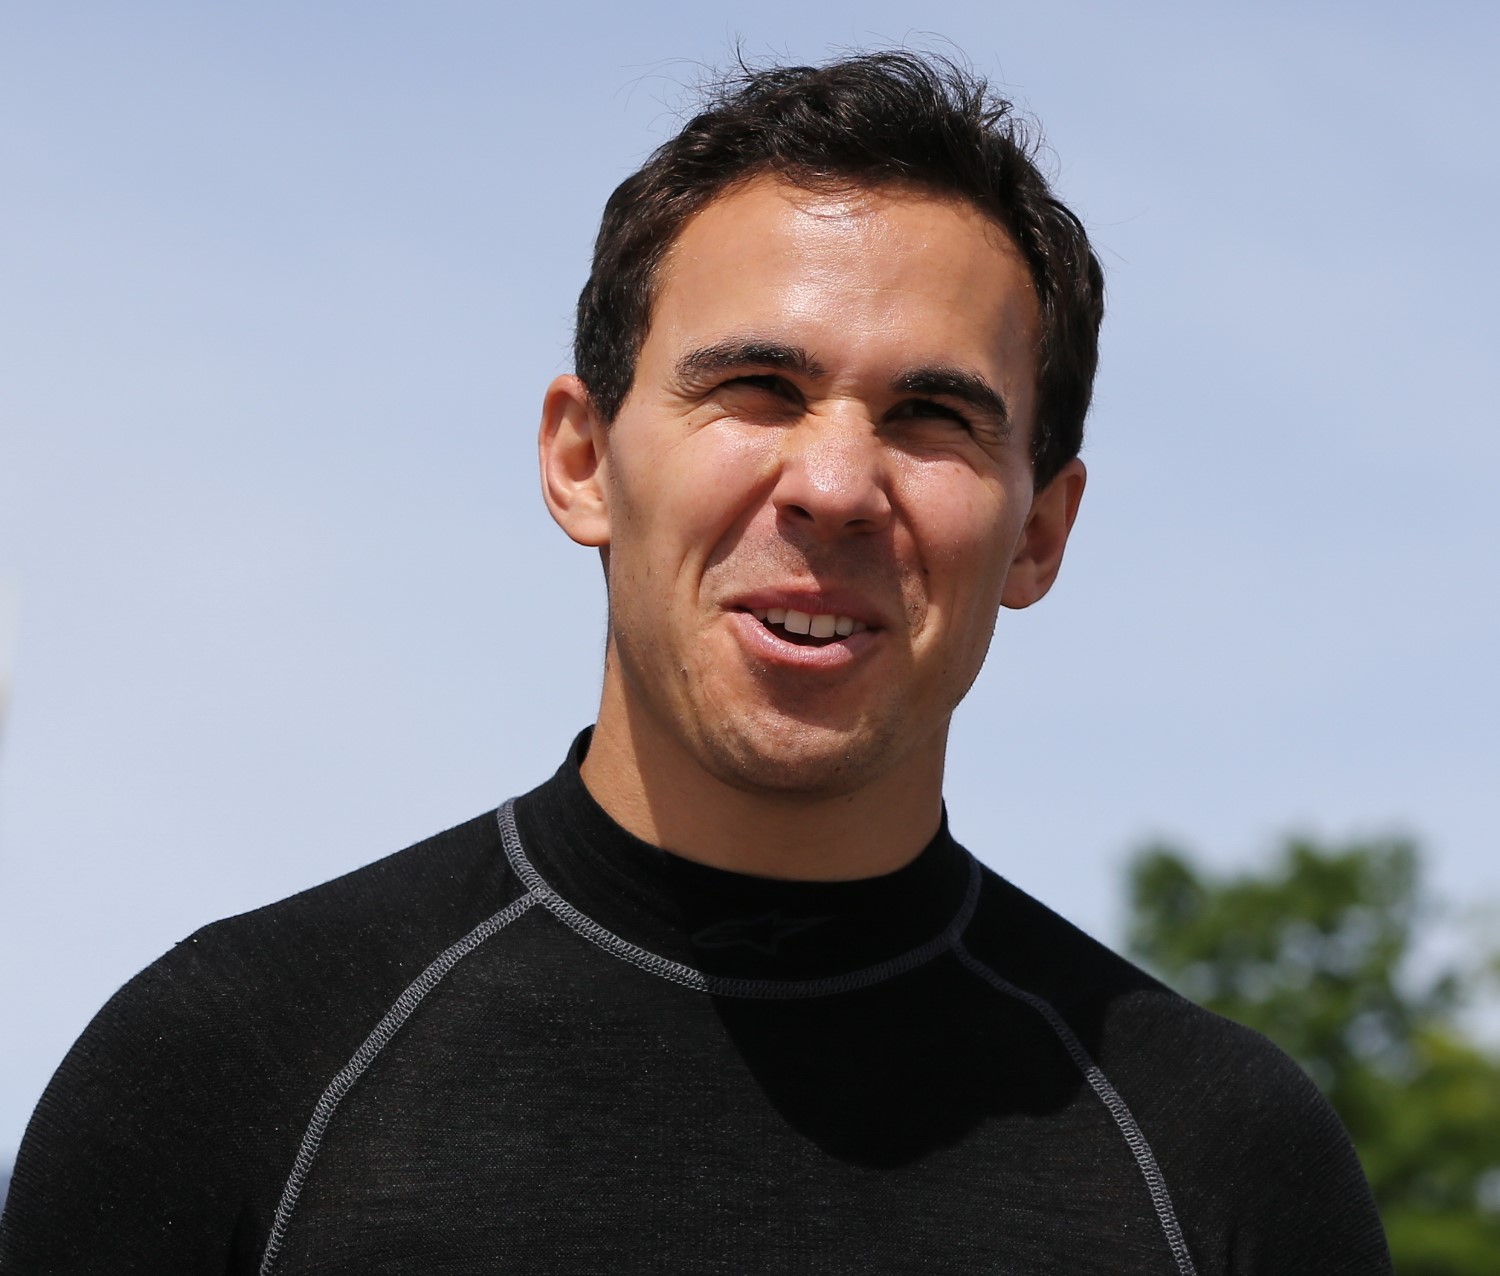 Can Wickens bring enough money?